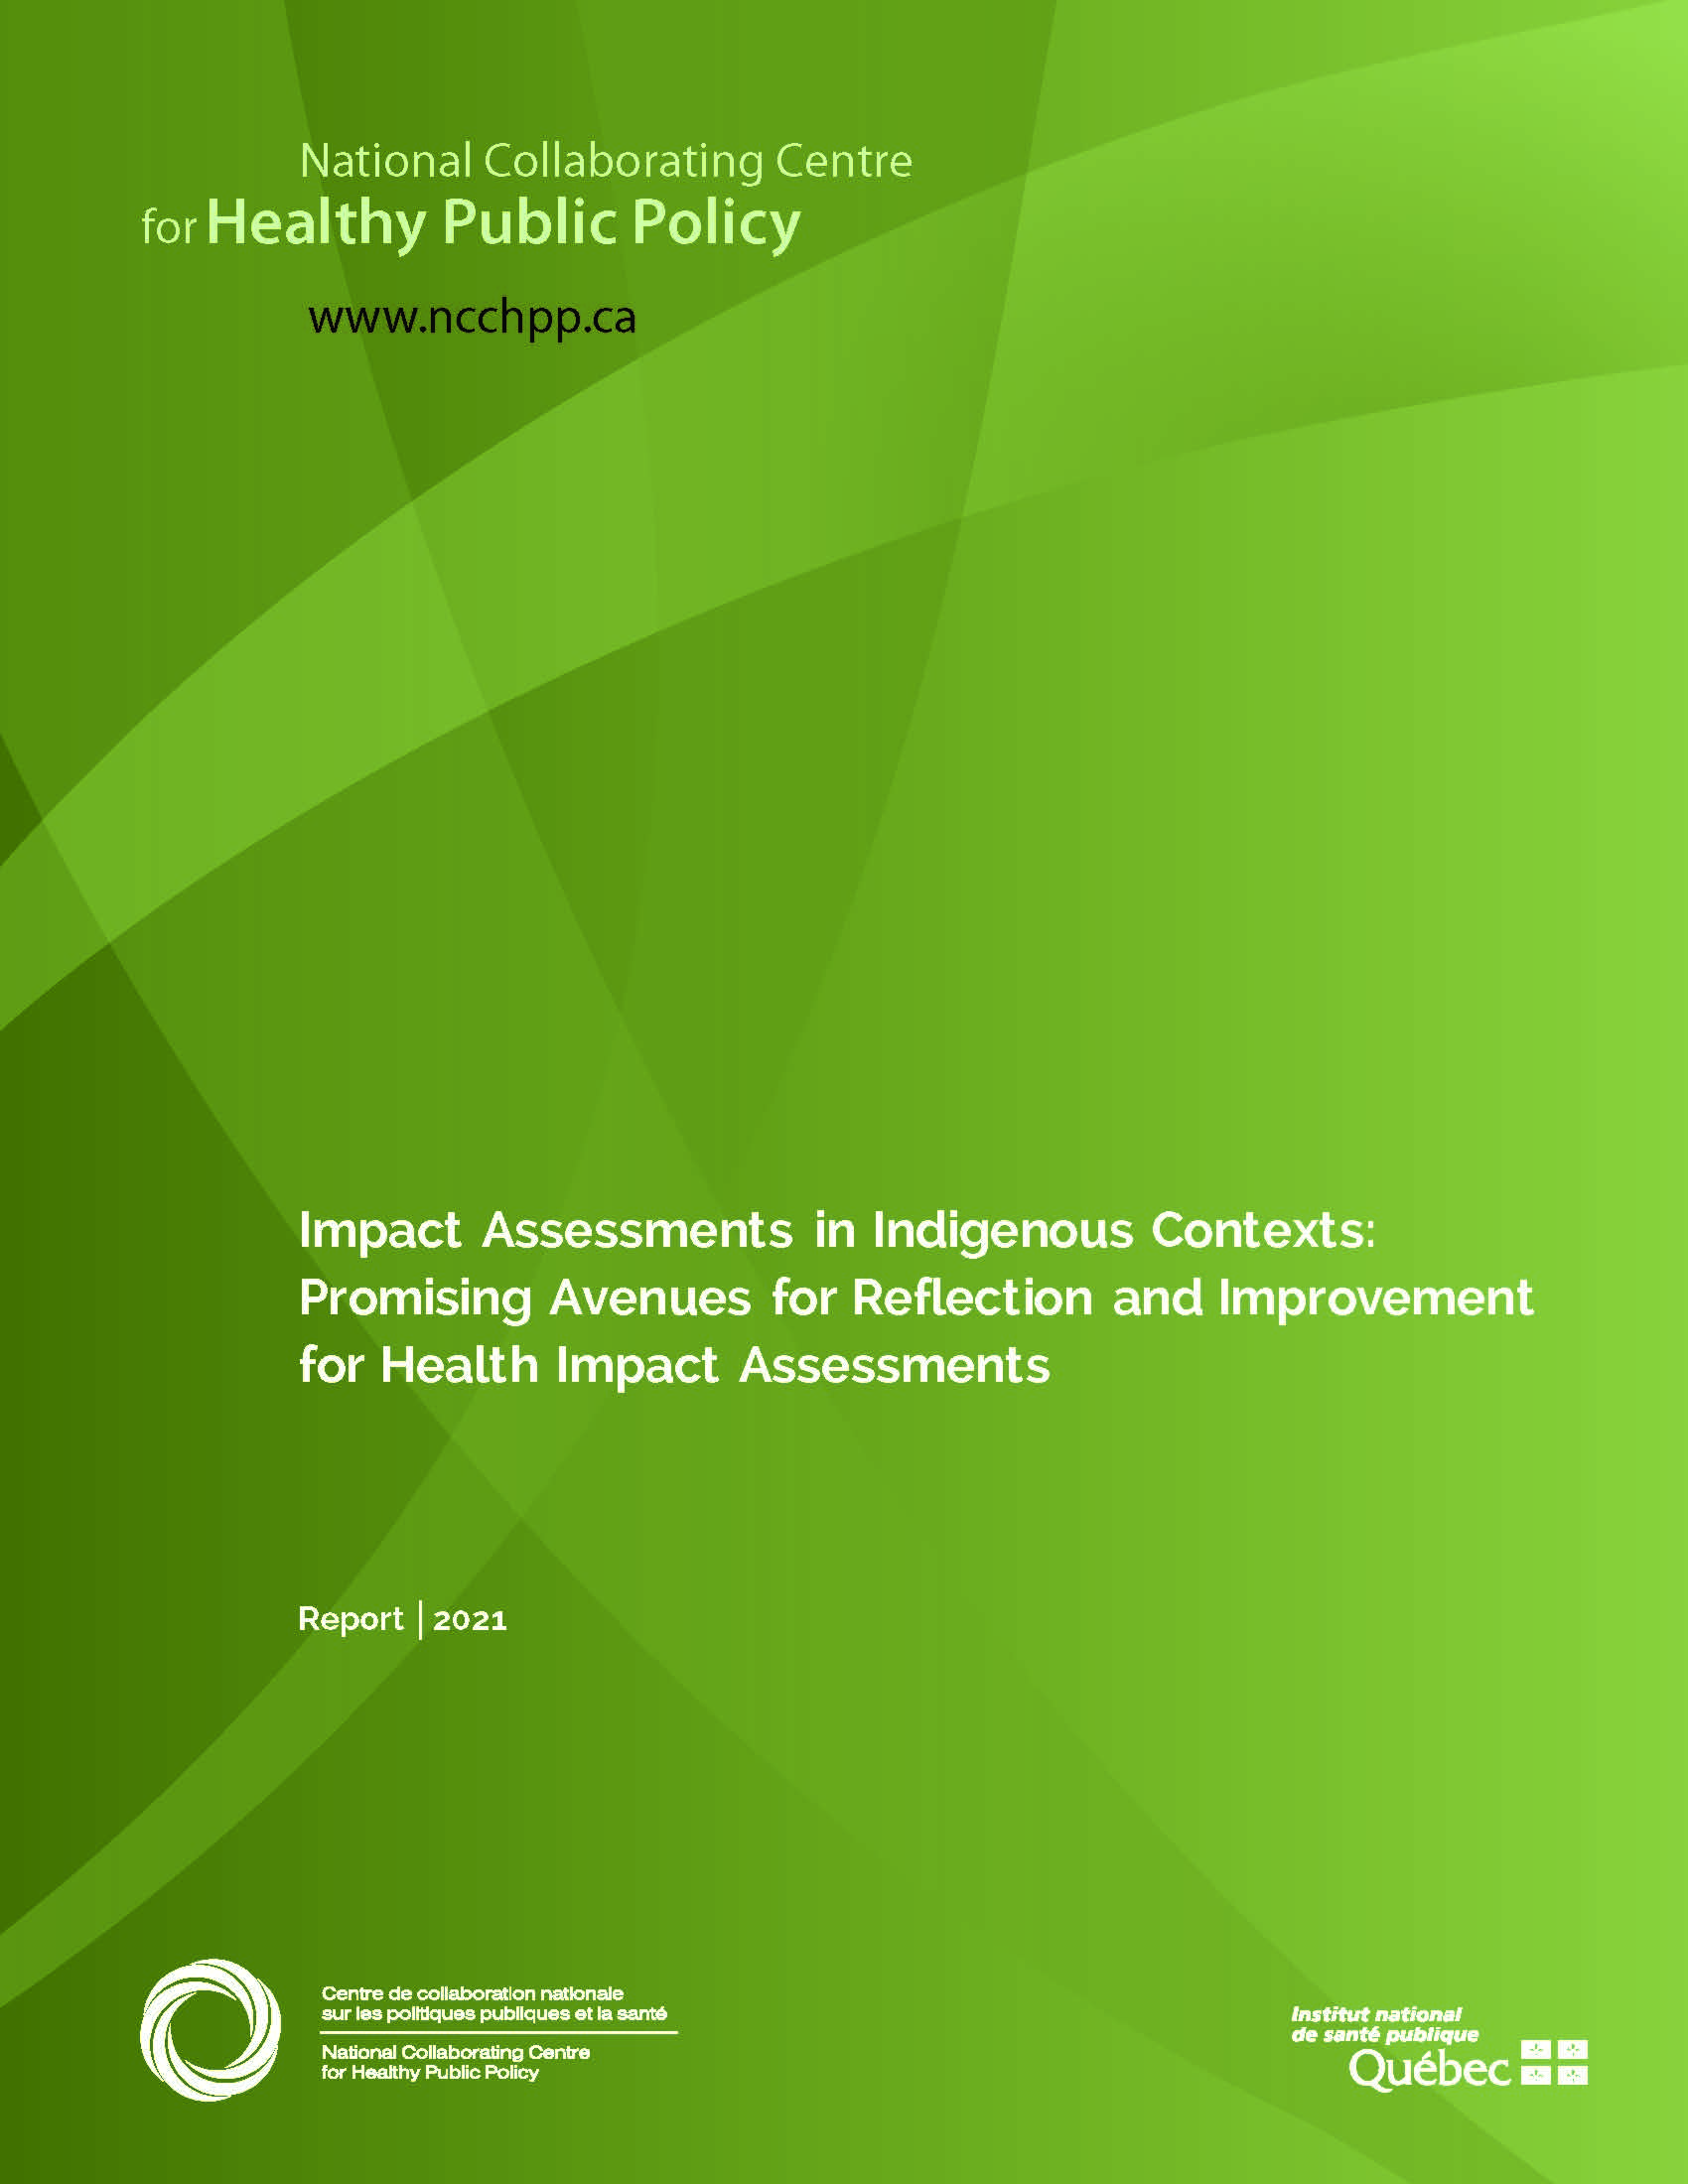 Impact Assessments in Indigenous Contexts: Promising Avenues for Reflection and Improvement for Health Impact Assessment